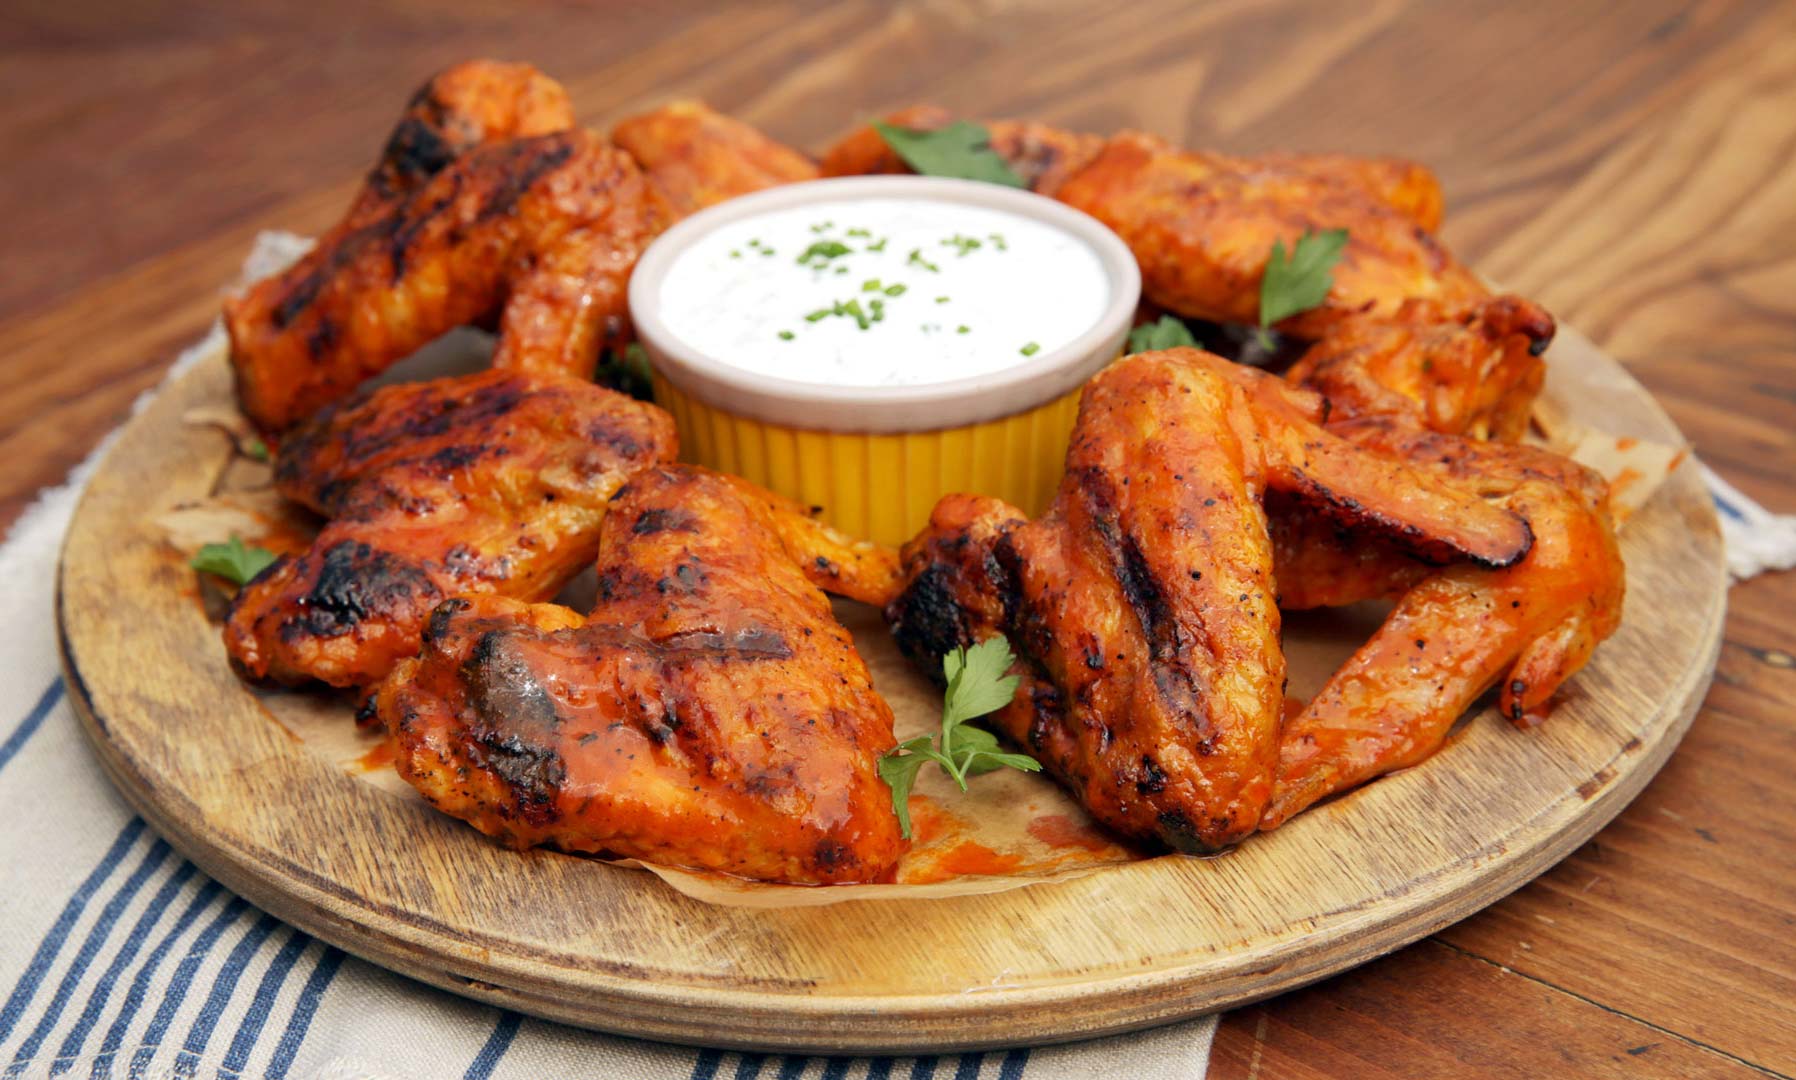 🥡 Order Your Fave Foods and We’ll Guess Your Age With Extreme Accuracy Chicken wings